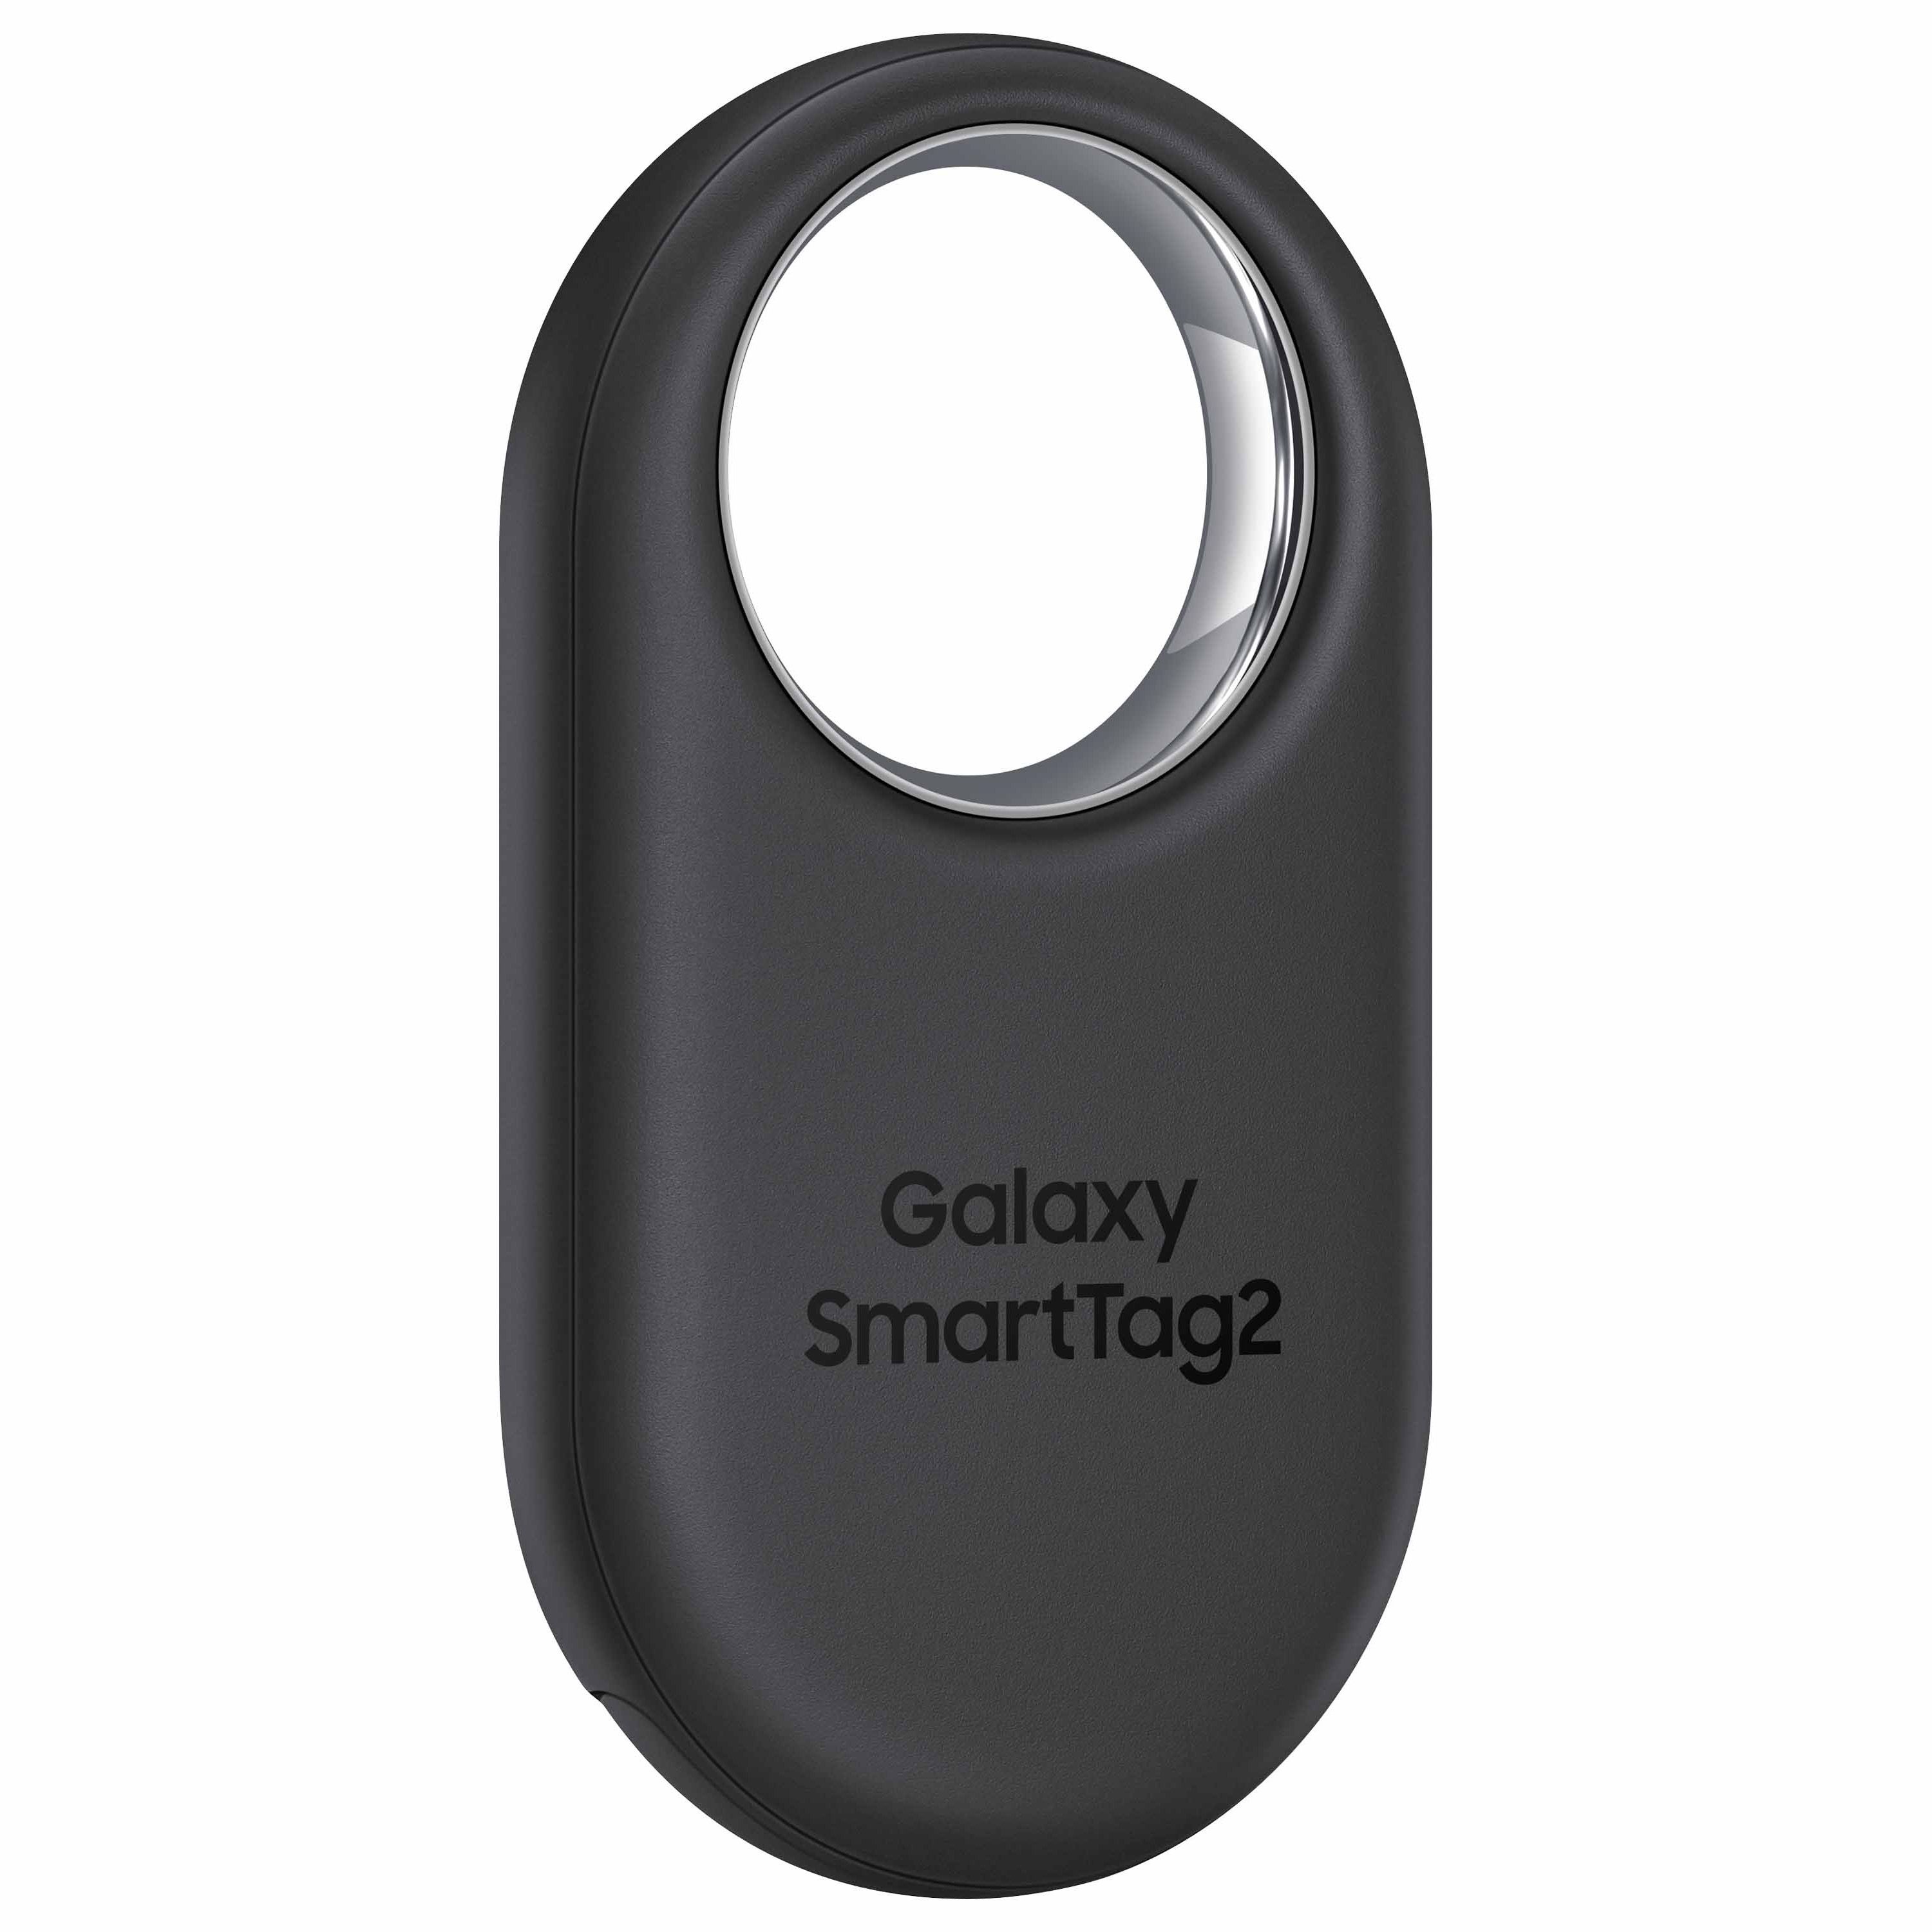 Samsung's New $30 SmartTag 2 Takes On Apple AirTags - CNET